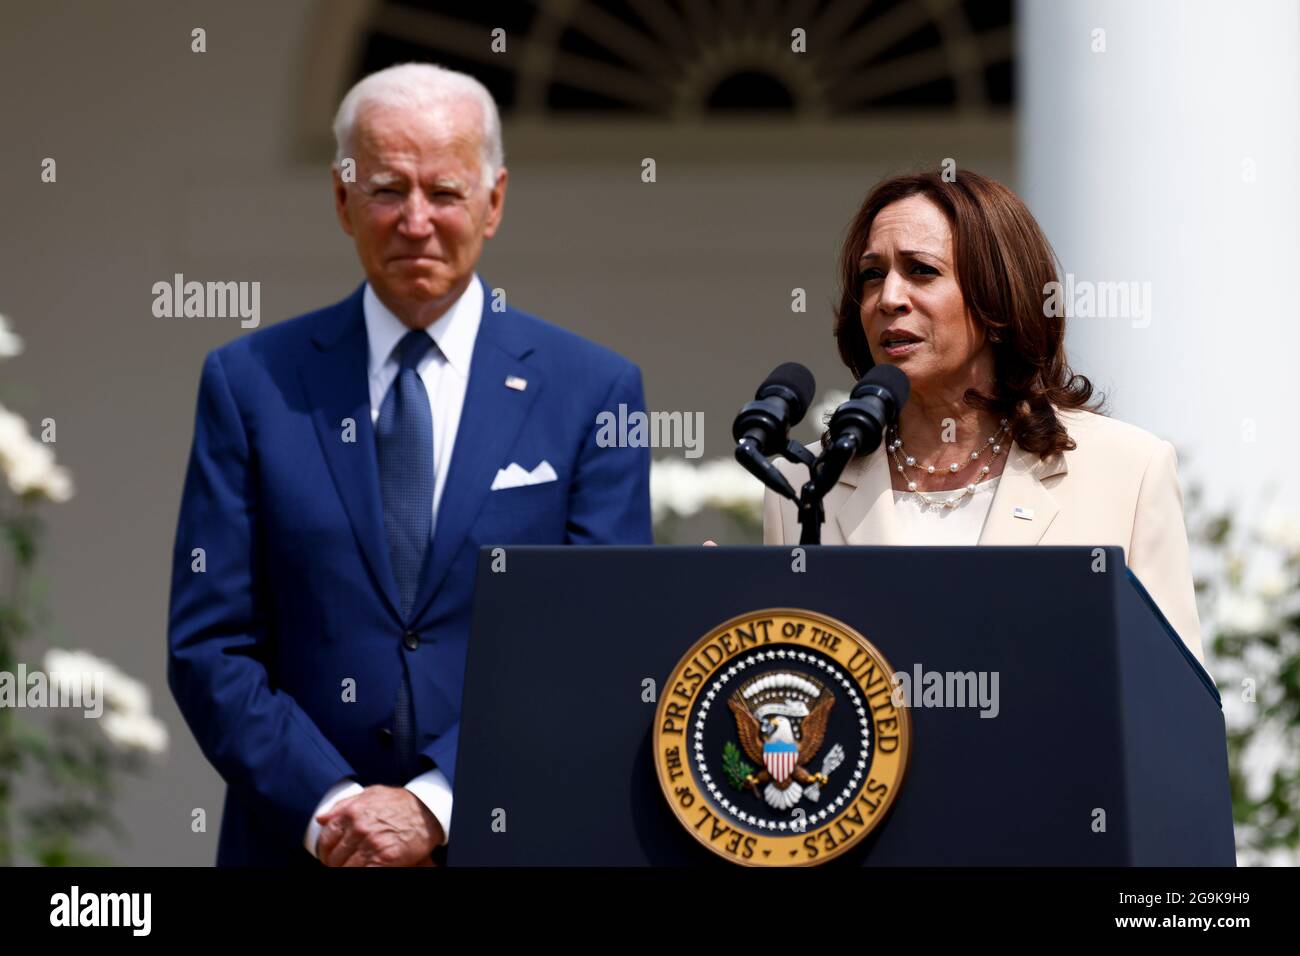 Washington, USA. 26th July, 2021. U.S. President Joe Biden (L) and Vice President Kamala Harris attend a ceremony celebrating the 31st anniversary of the Americans with Disabilities Act (ADA) at the White House in Washington, DC, the United States, on July 26, 2021. Credit: Ting Shen/Xinhua/Alamy Live News Stock Photo